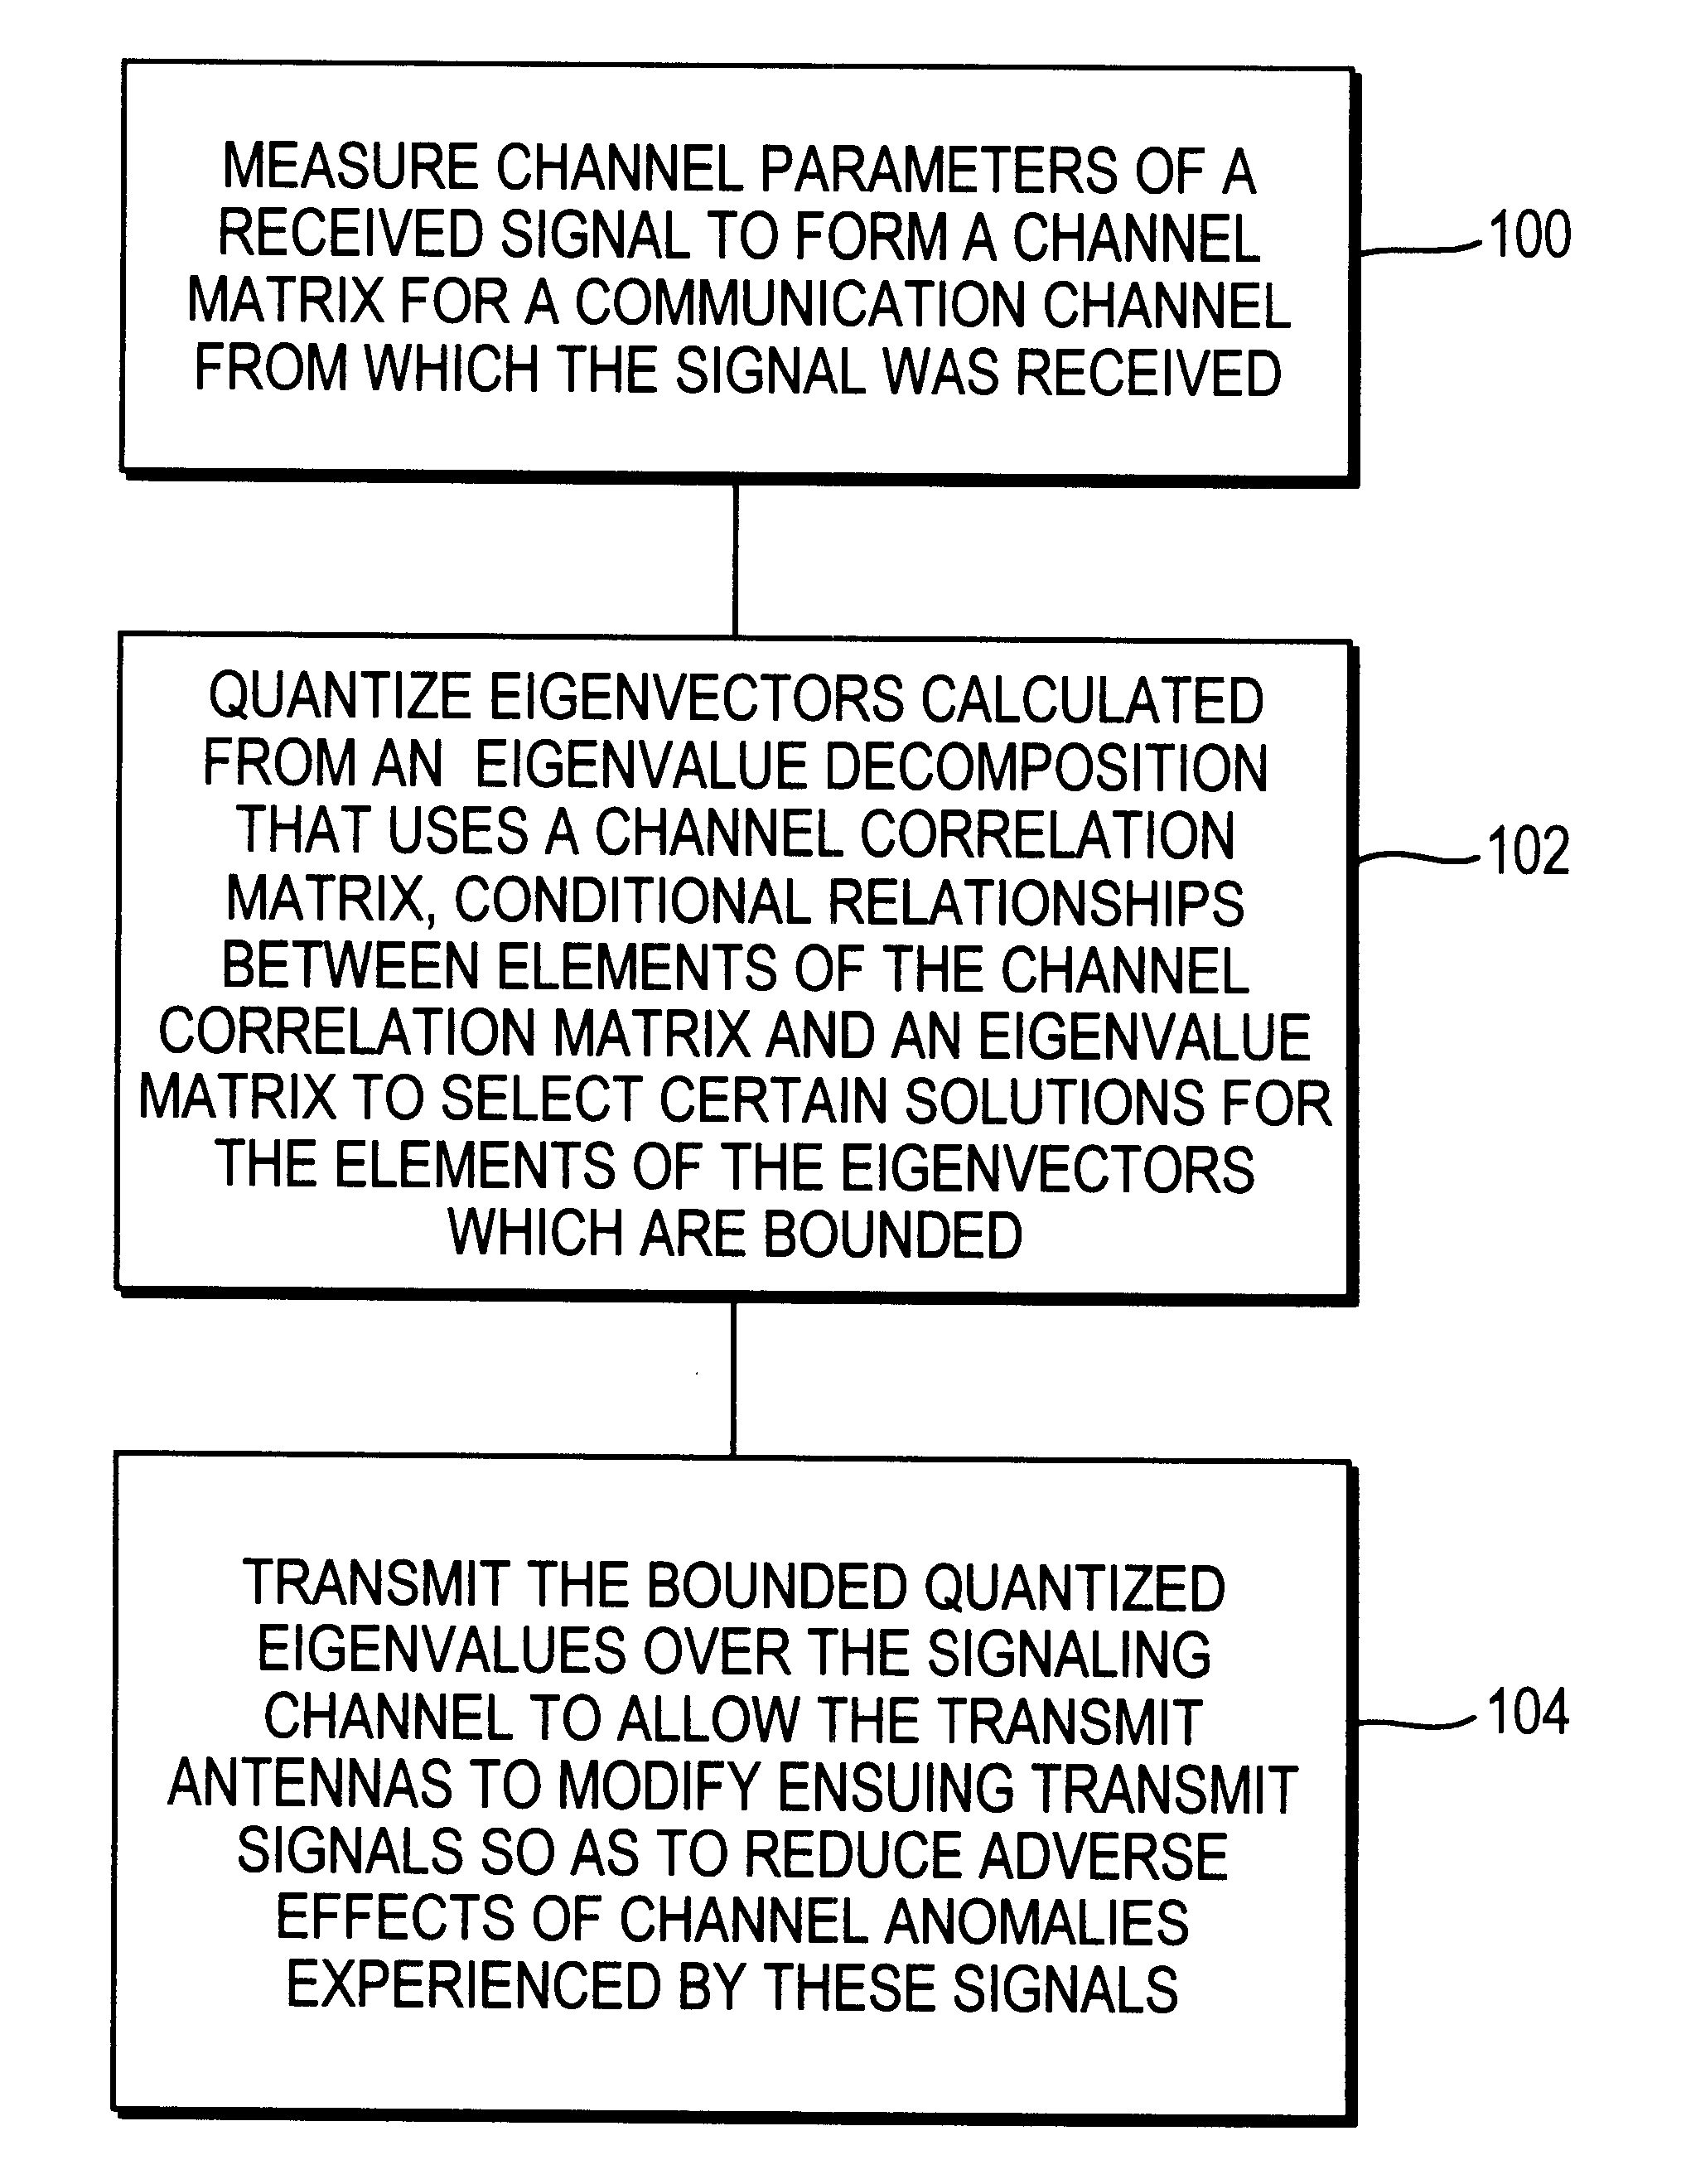 Method for closed-loop subspace transmission and reception in a two transmit N-receive antenna system